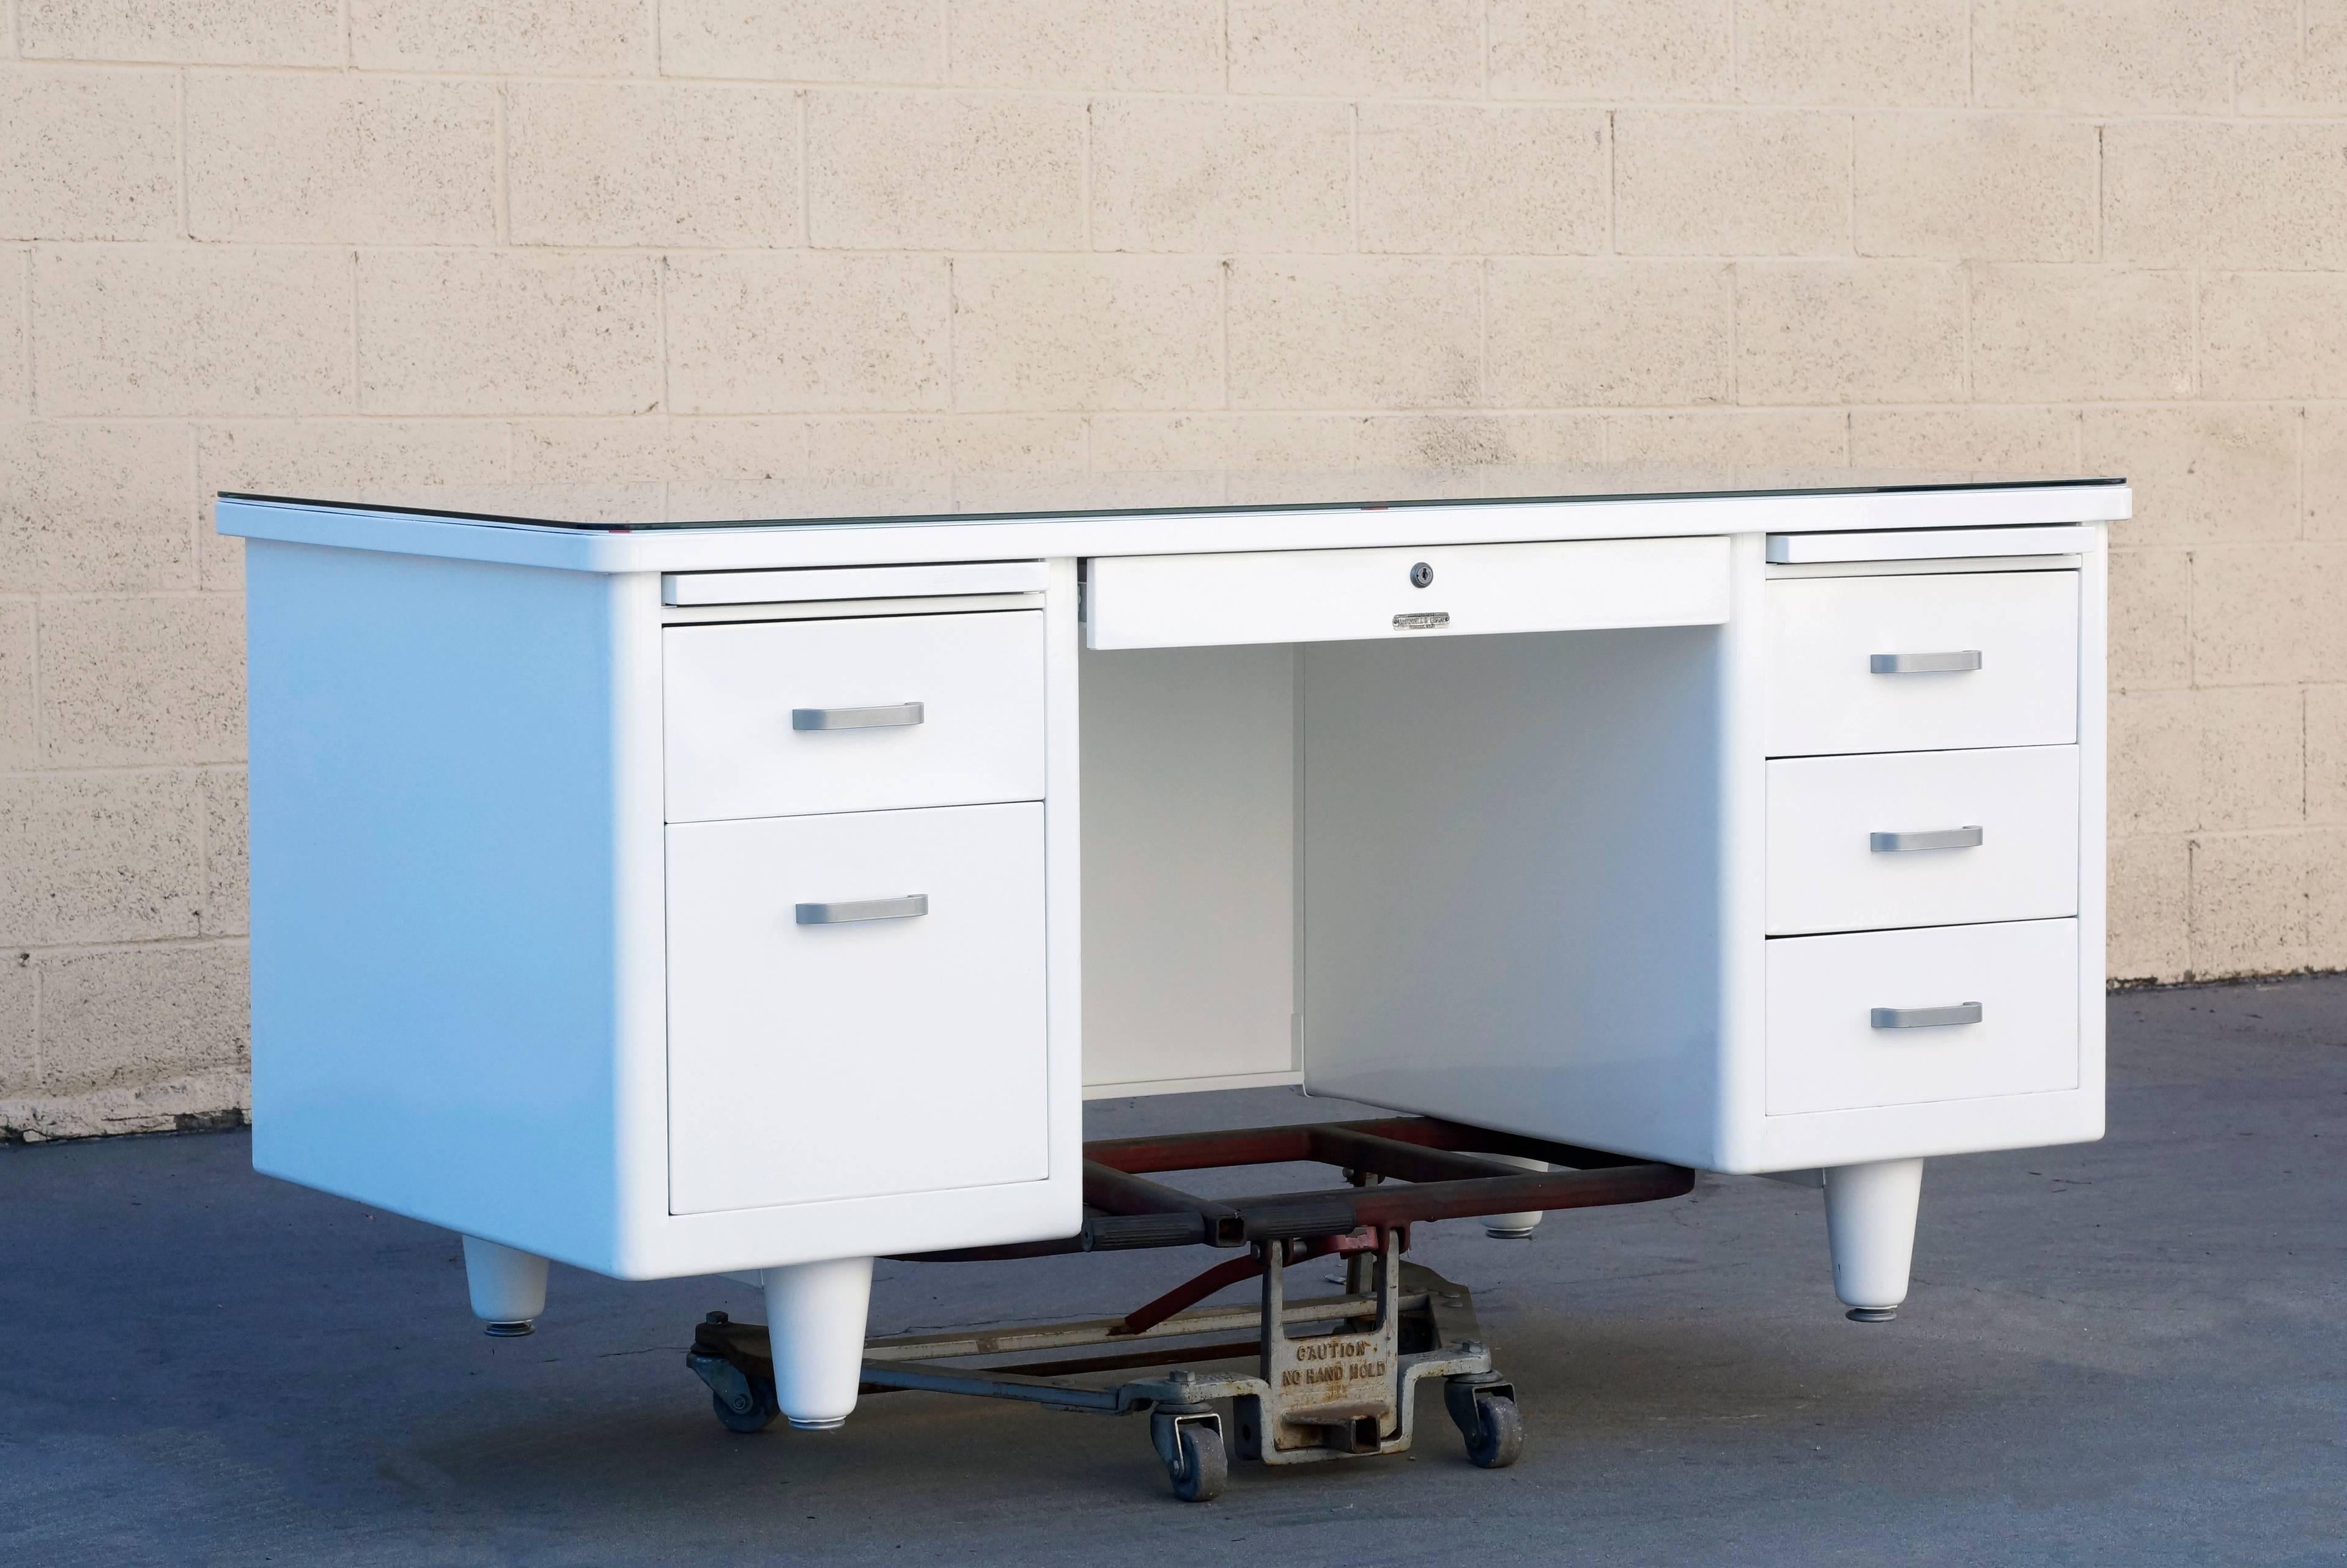 1960s McDowell Craig tanker refinished in gloss white with optional custom glass tabletop. This classic double pedestal desk features many utility drawers, one filing drawer, one locking stationary drawer and two letter trays. All original aluminum